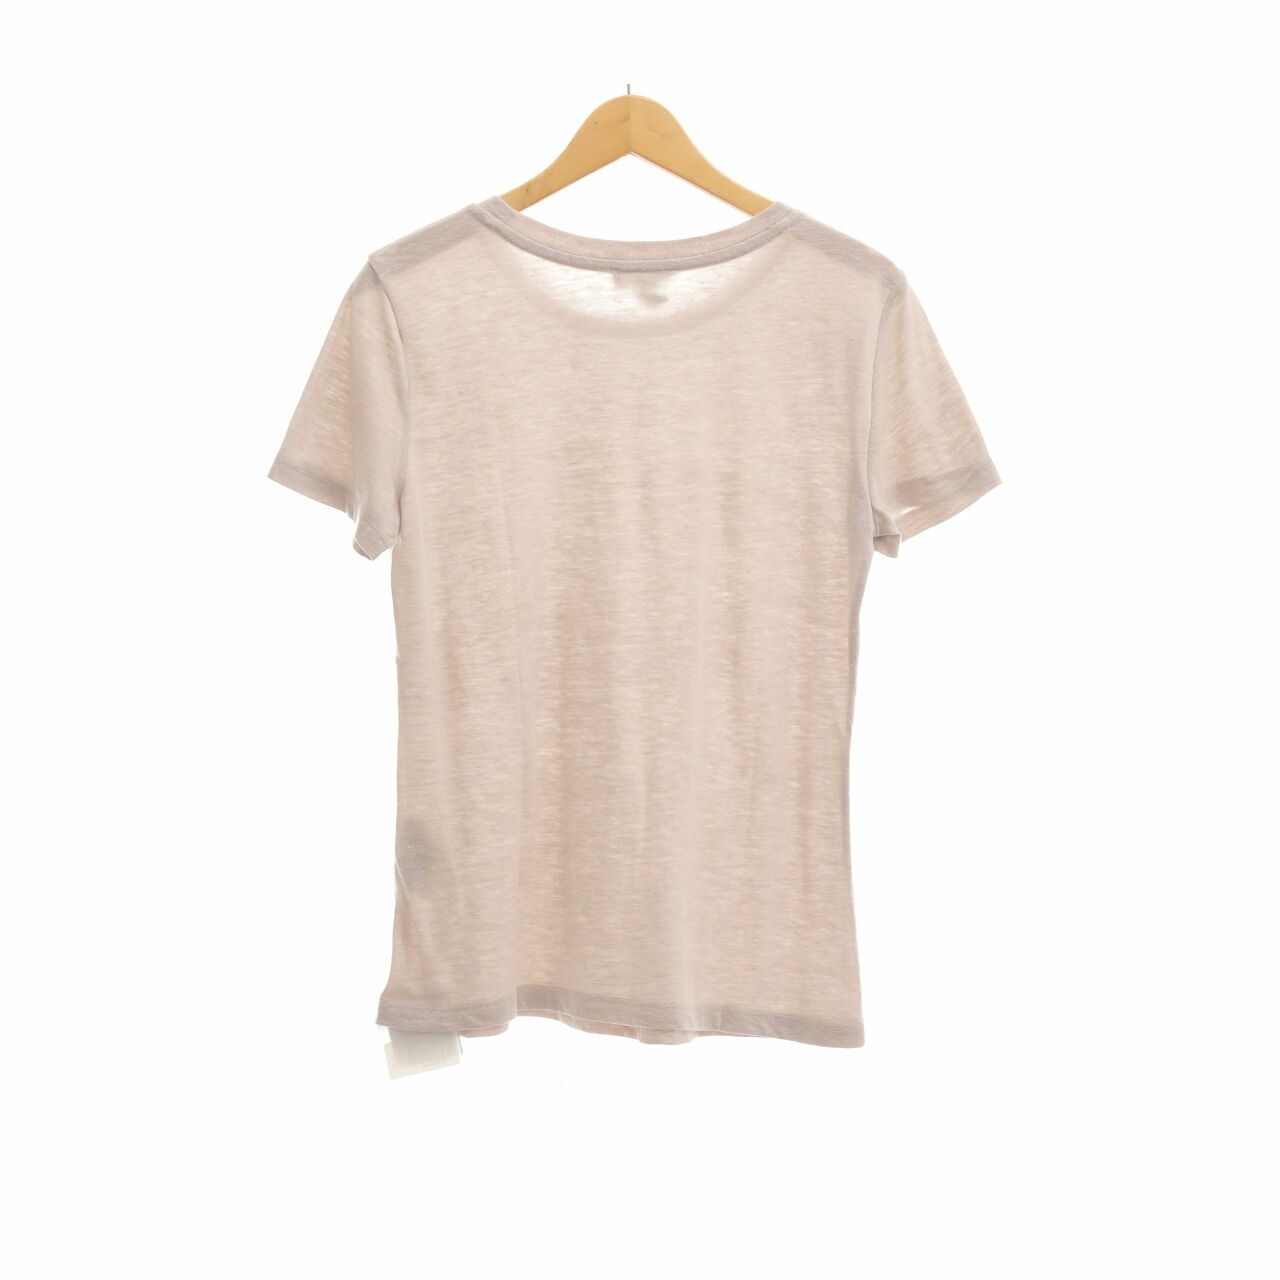 Forever 21 Nude Tshirt 